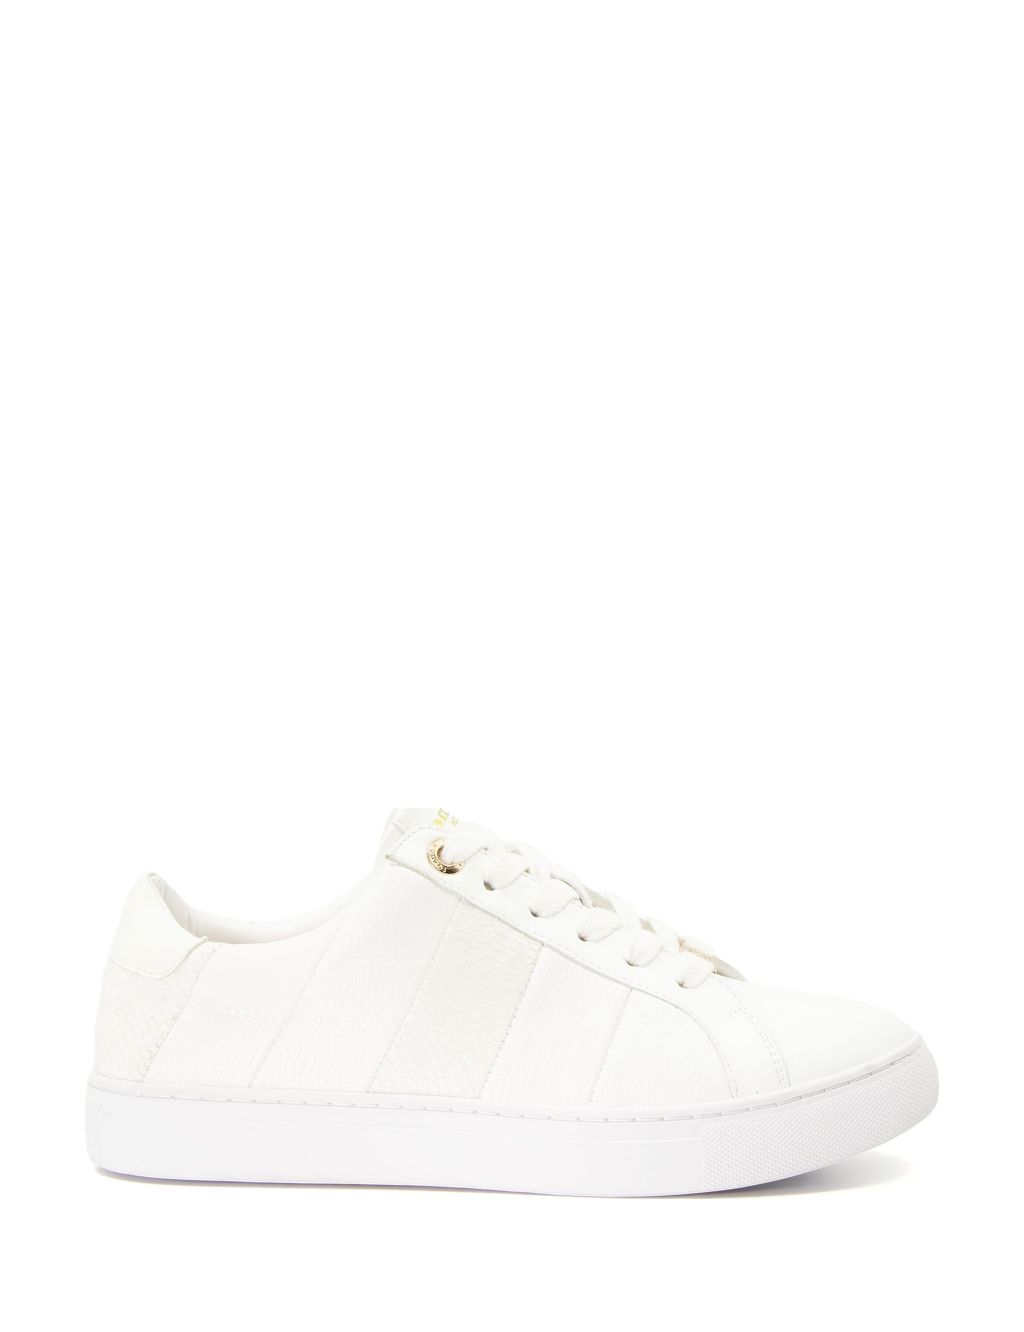 Lace Up Stripe Trainers image 1